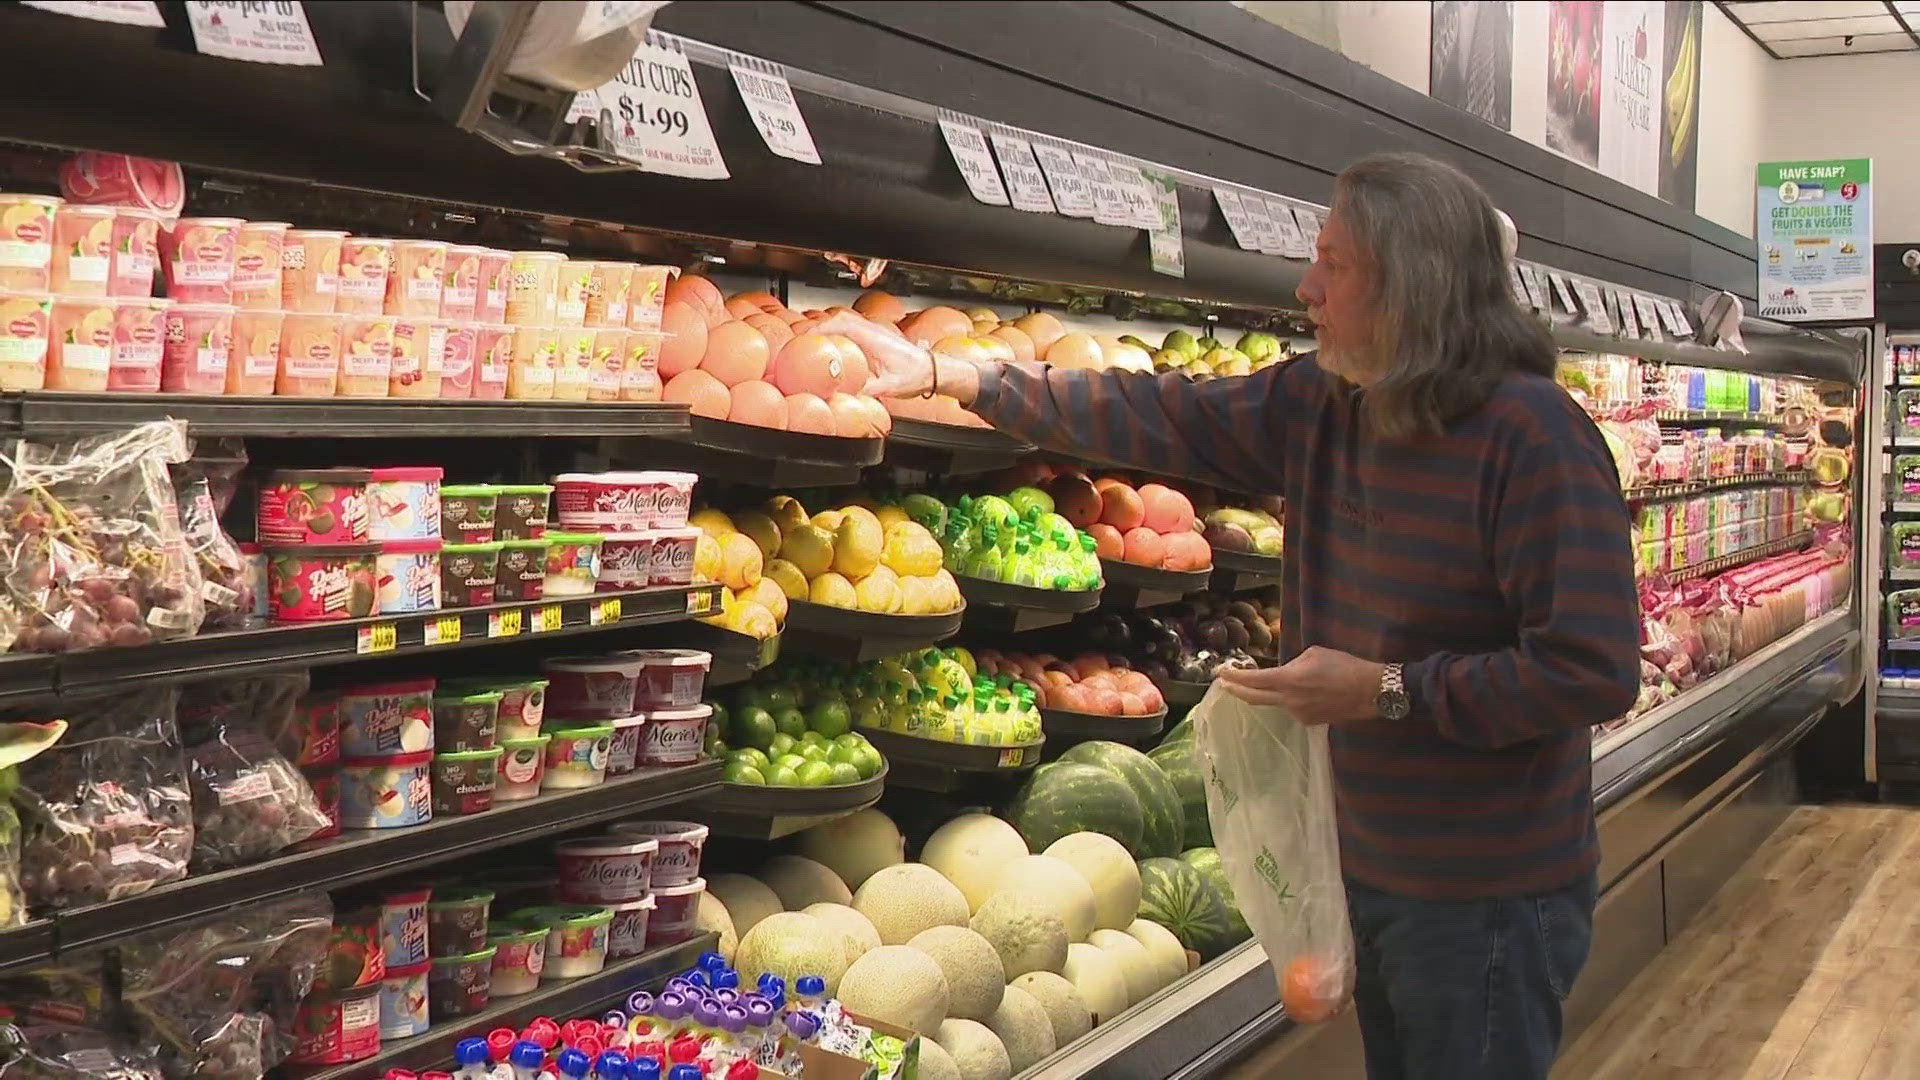 The program aims to help shoppers who use SNAP benefits by providing a dollar-for-dollar match on produce purchases.